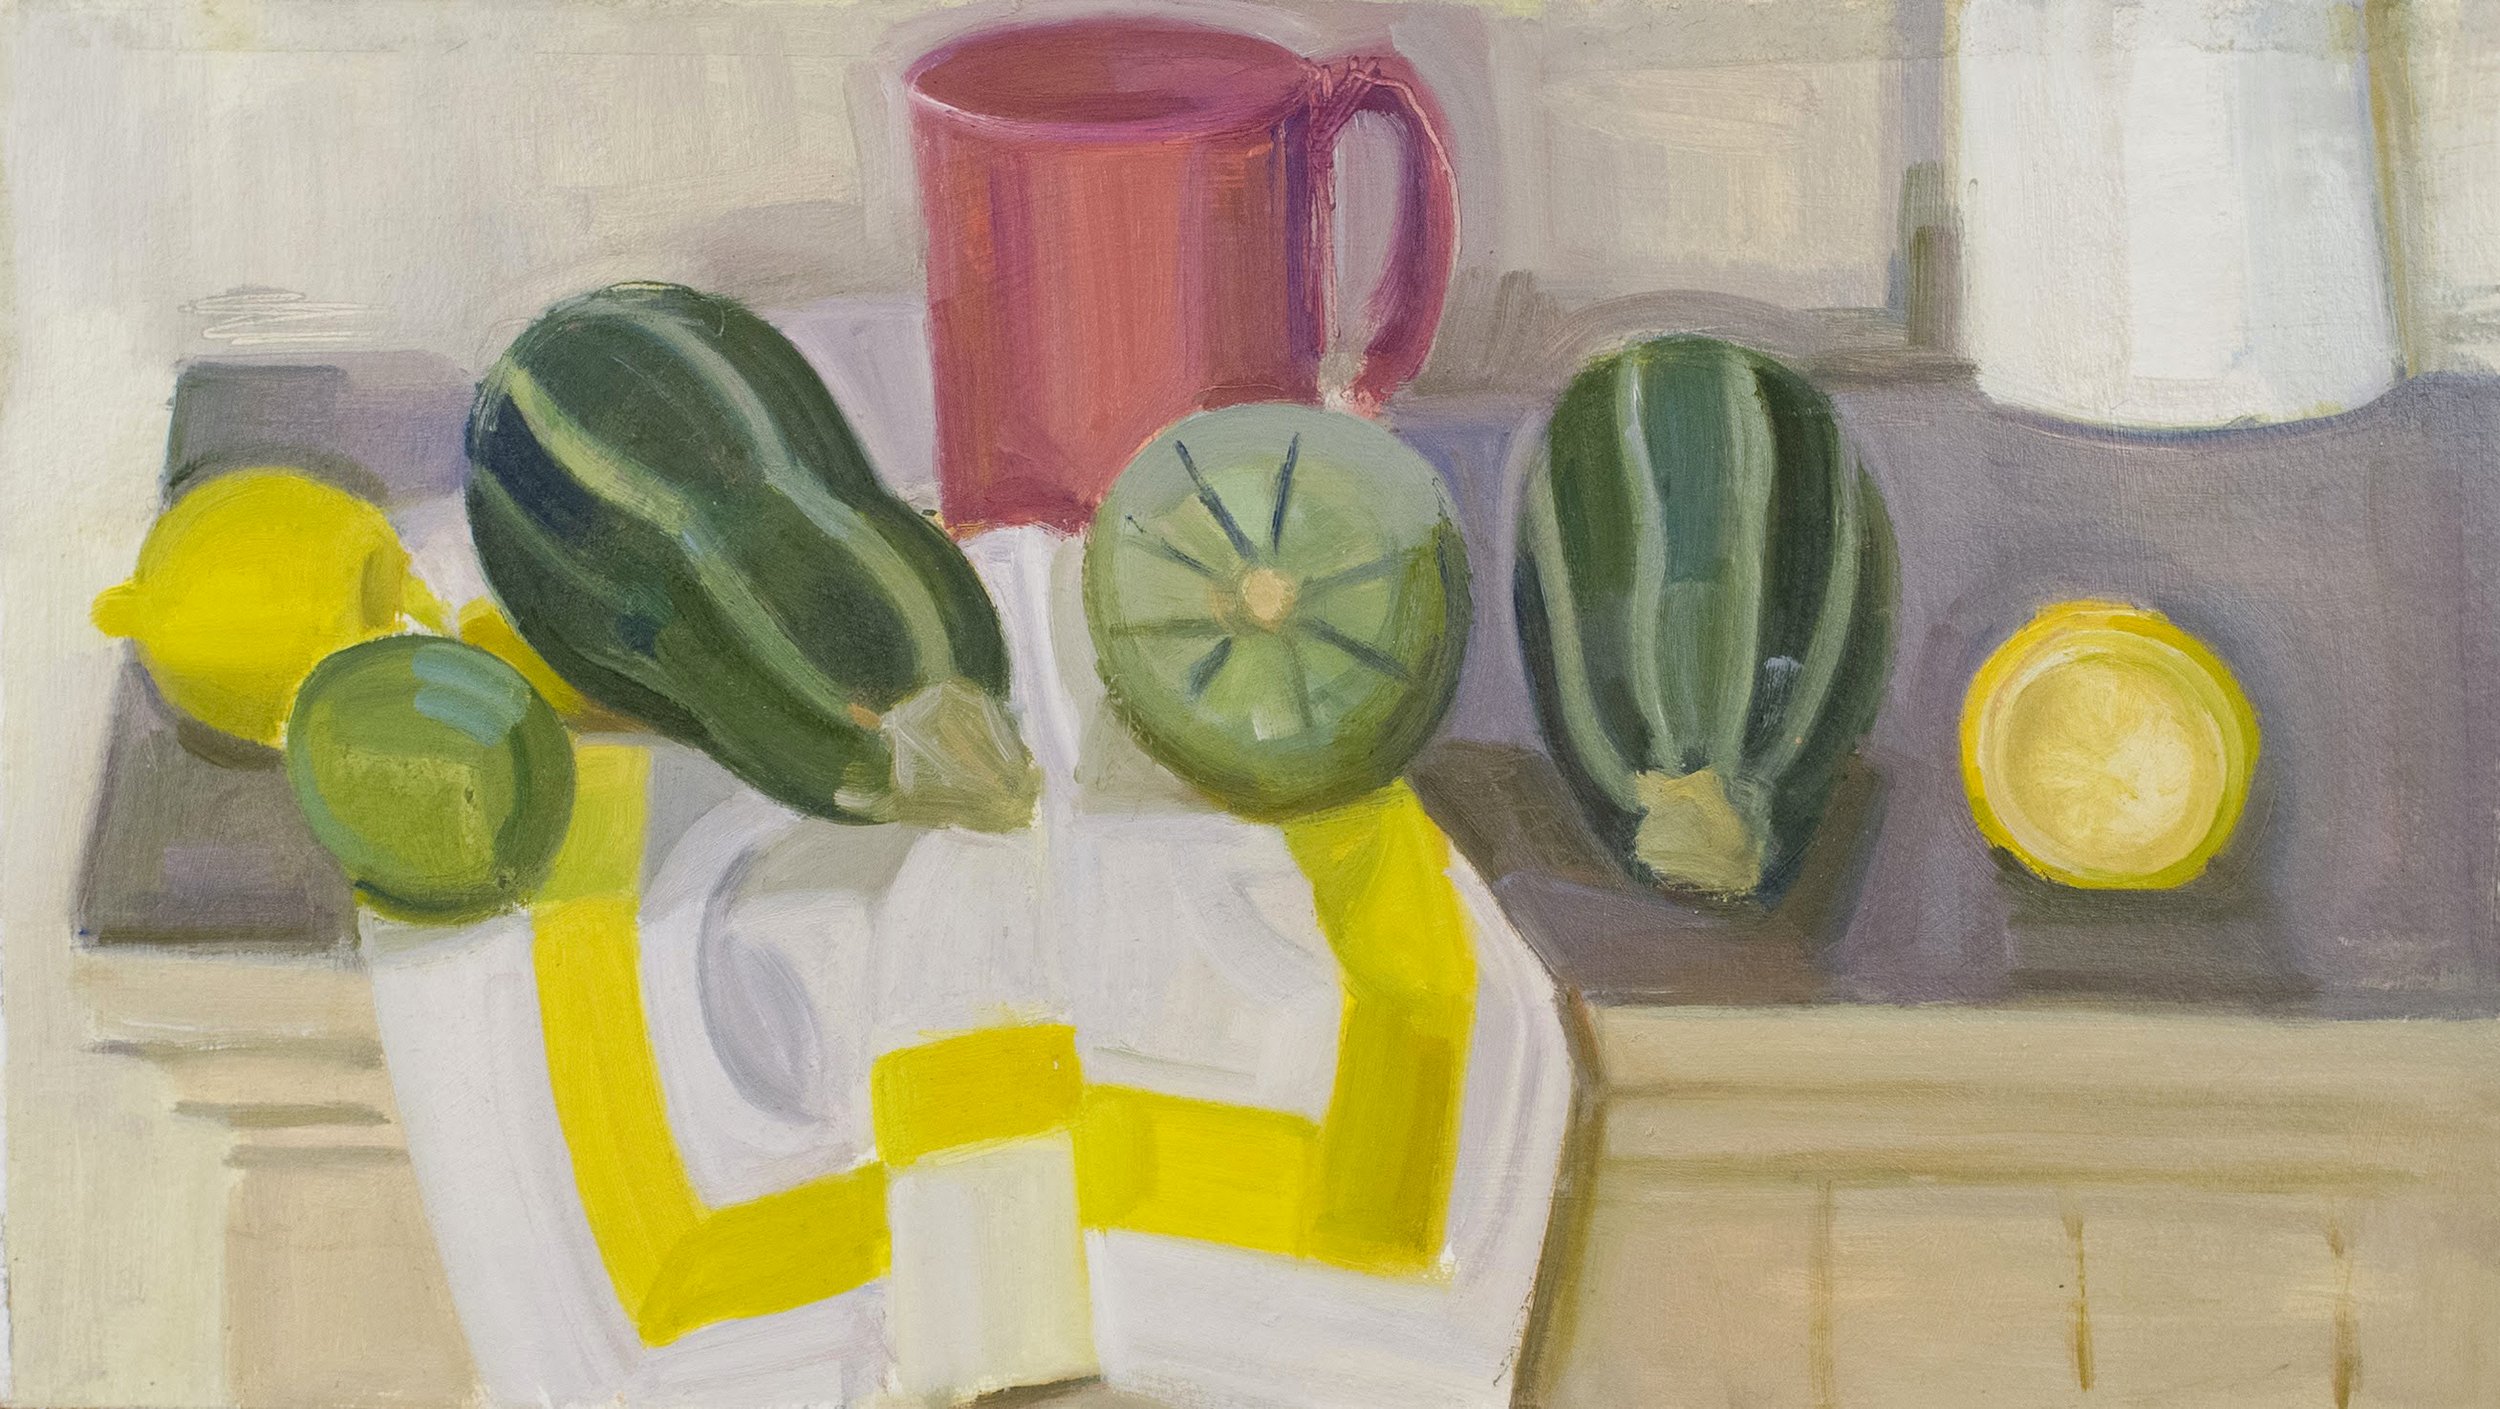   Pink Cup, Tiger Squash, Lemons and Yellow Striped Napkin , 2017, oil/panel, 11 x 20 in. (Not for sale) 